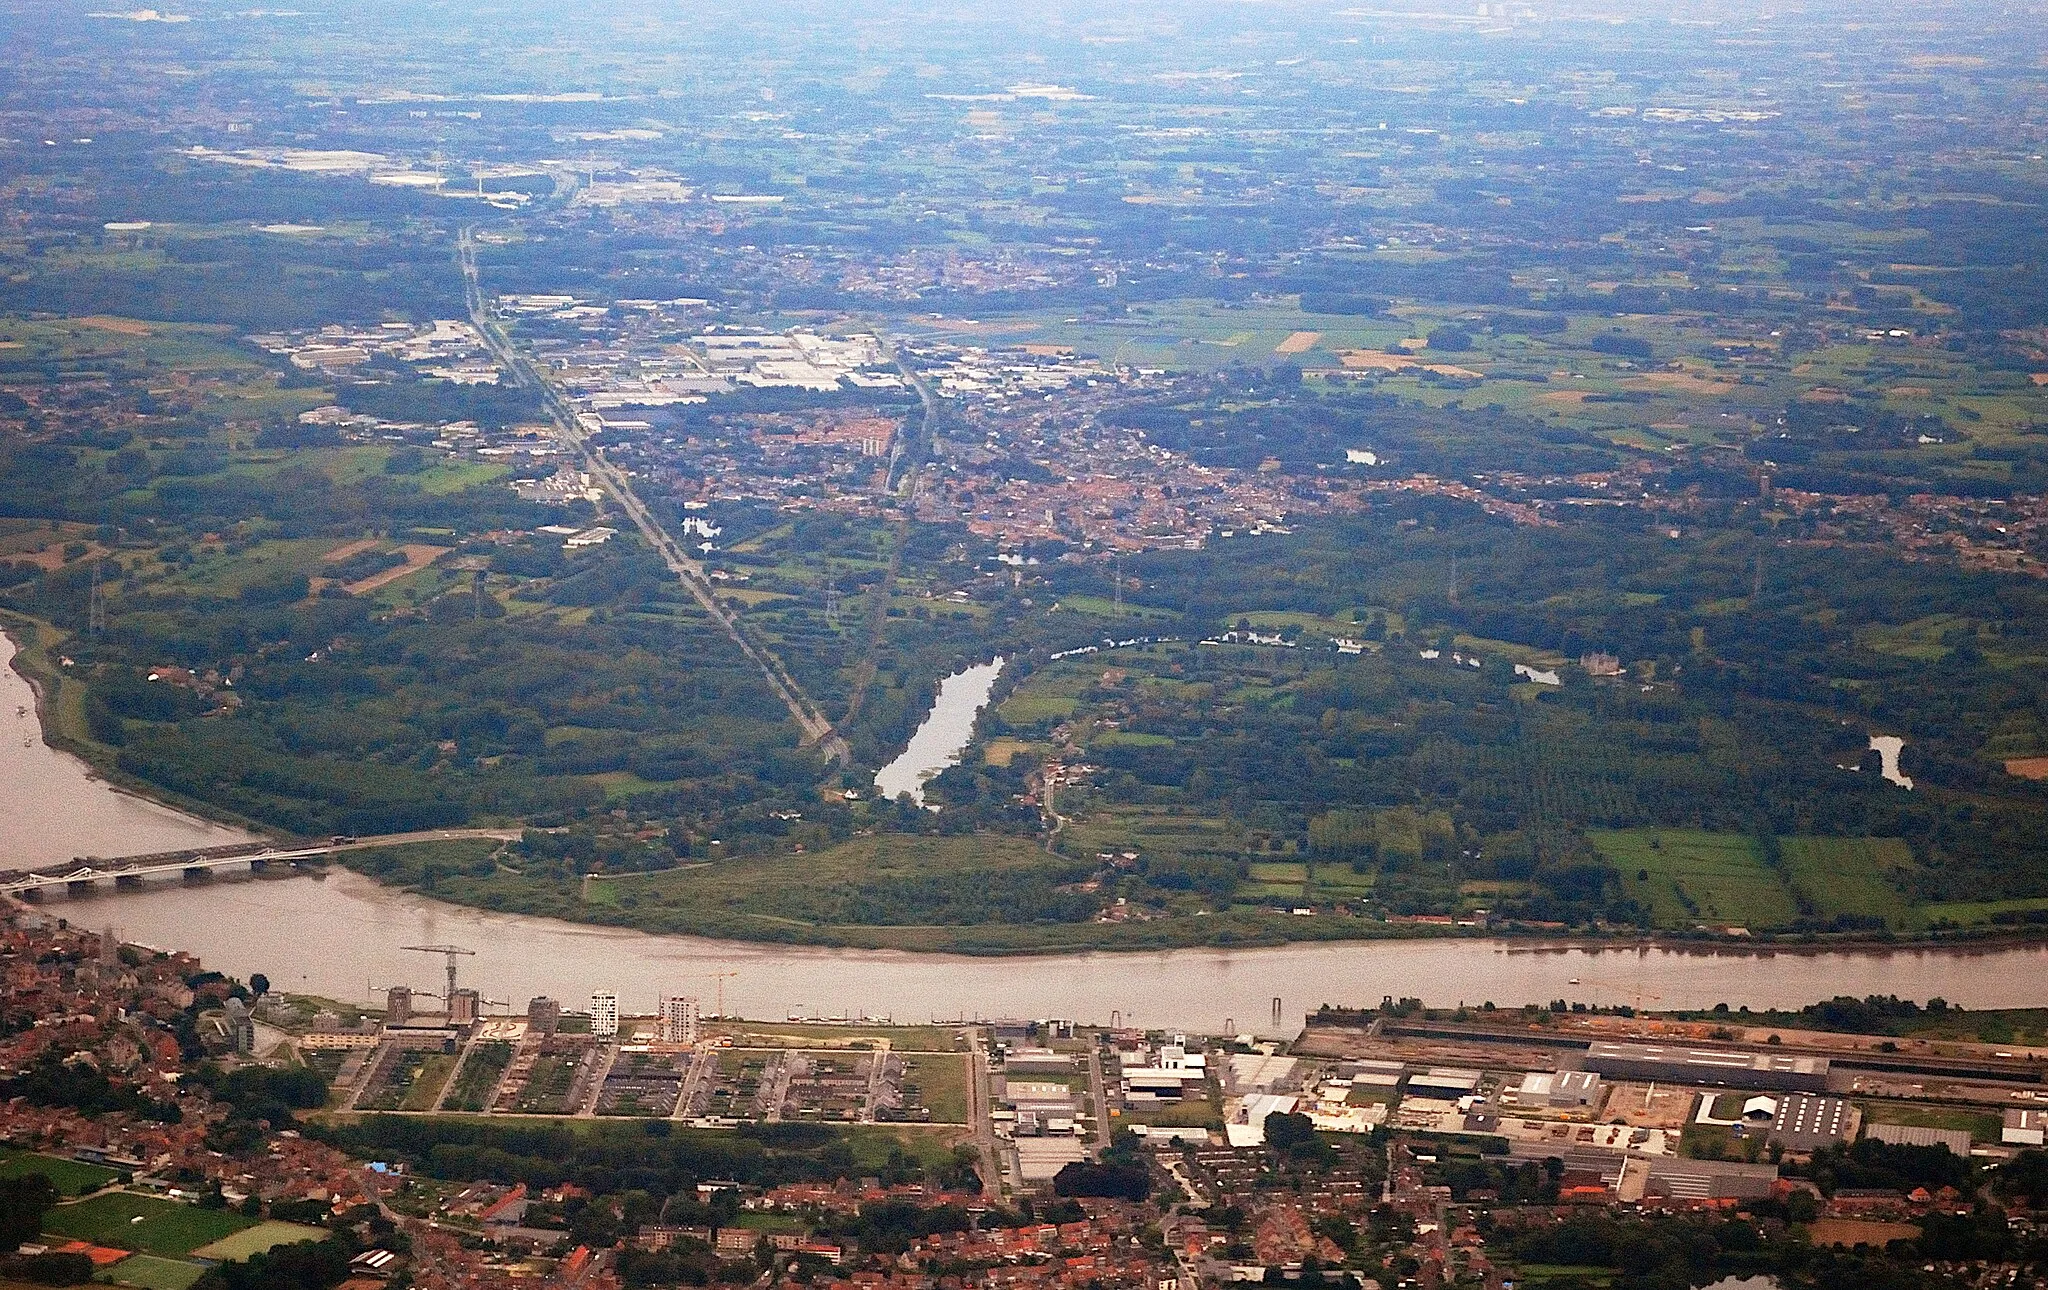 Photo showing: Aerial photograph of the Flemish town of Bornem viewed from the northeast. Near the bottom is the town of Temse on the left bank of the Scheldt, with Temse bridge and the historic crane of the former Boel shipyard. In the background behind Bornem is Puurs and then, slightly to the left, Kalfort. Nikon D60 f=55mm f/5.6 at 1/640s ISO 800. Contrast and colours enhanced using Nikon NX Studio 1.3.2. Framed and sharpened using GIMP 2.10.34.